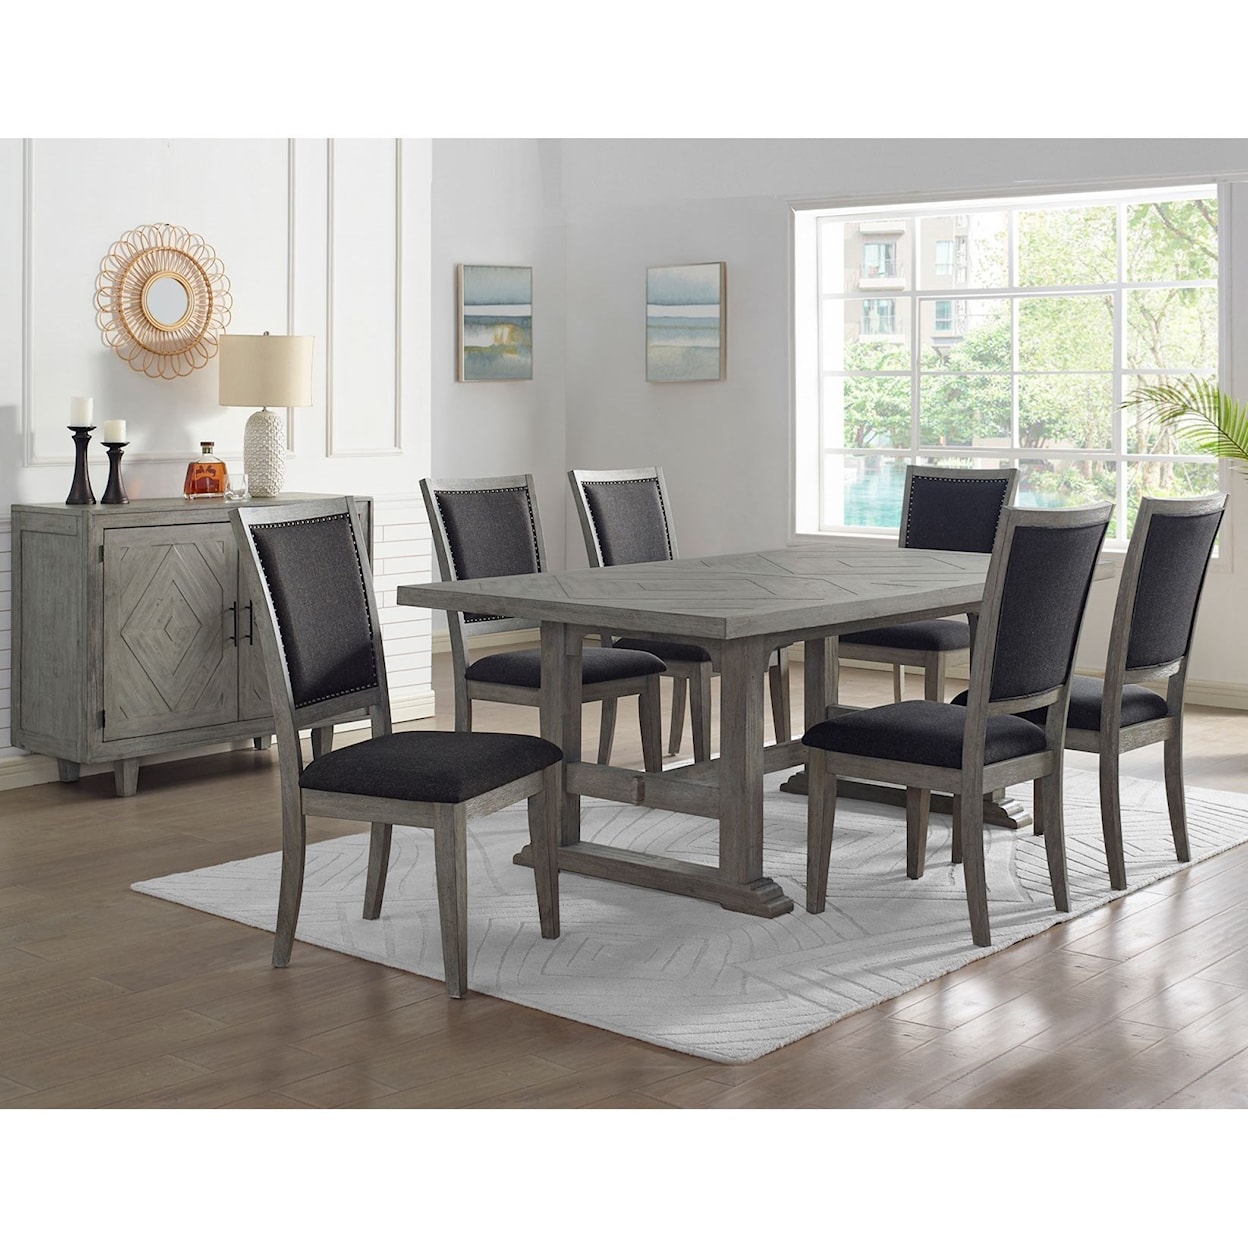 Prime Whitford Dining Room Group